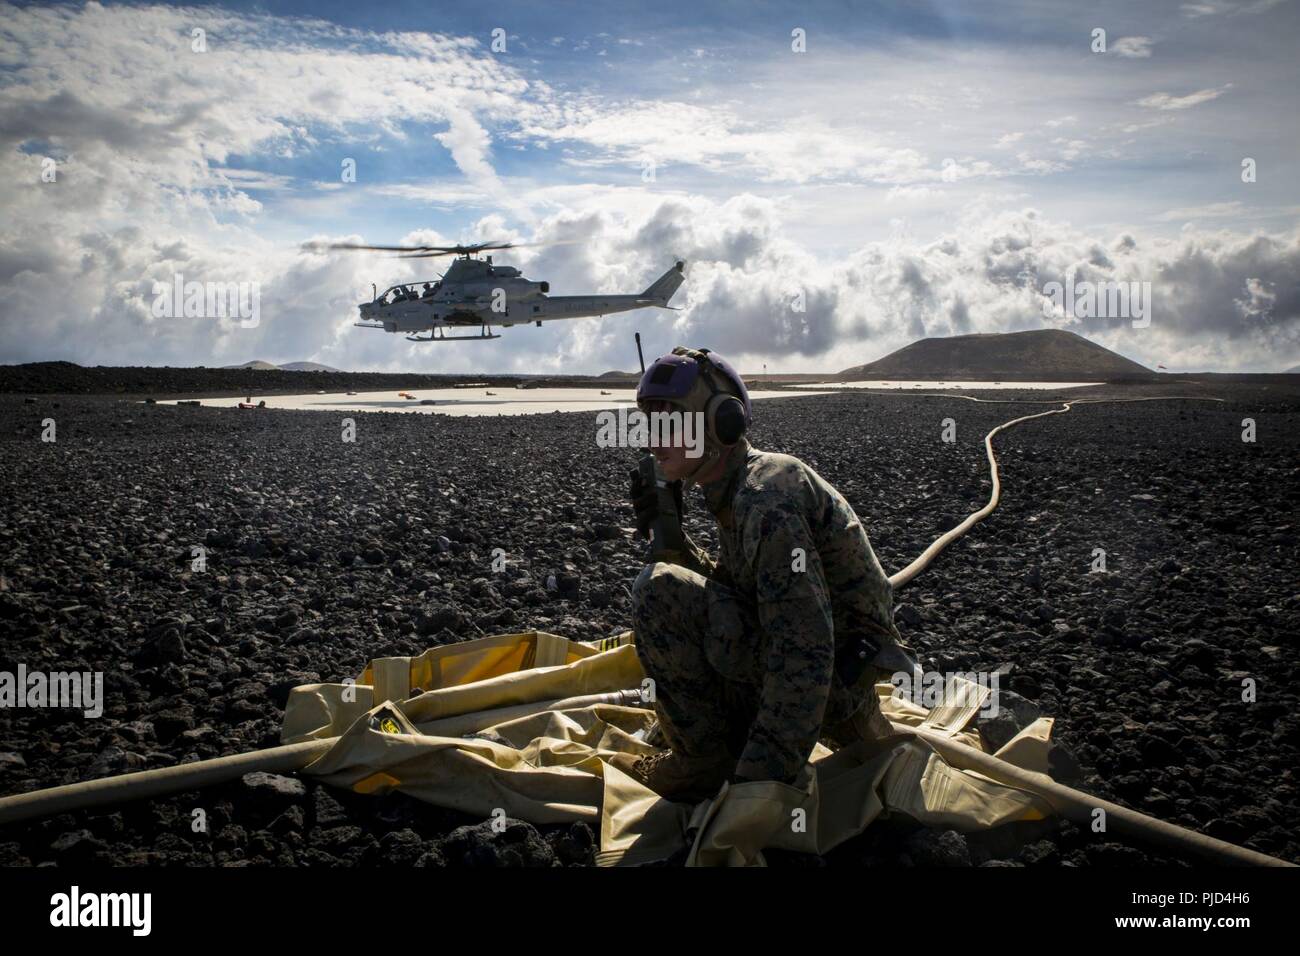 POHAKULOA TRAINING AREA, Hawaii (July 18, 2018) U.S. Marine Cpl. Michael Michehl, a line noncommissioned officer with Marine Wing Support Detachment 24, controls forward arming and refueling point operations after refueling a Bell AH-1W Super Cobra during a field test for the Expeditionary Mobile Fuel Additization Capability system as part of Rim of the Pacific (RIMPAC) exercise at Pohakuloa Training Area, Hawaii, July 18, 2018. RIMPAC provides high-value training for task-organized, highly capable Marine Air-Ground Task Force and enhances the critical crisis response capability of U.S. Marine Stock Photo